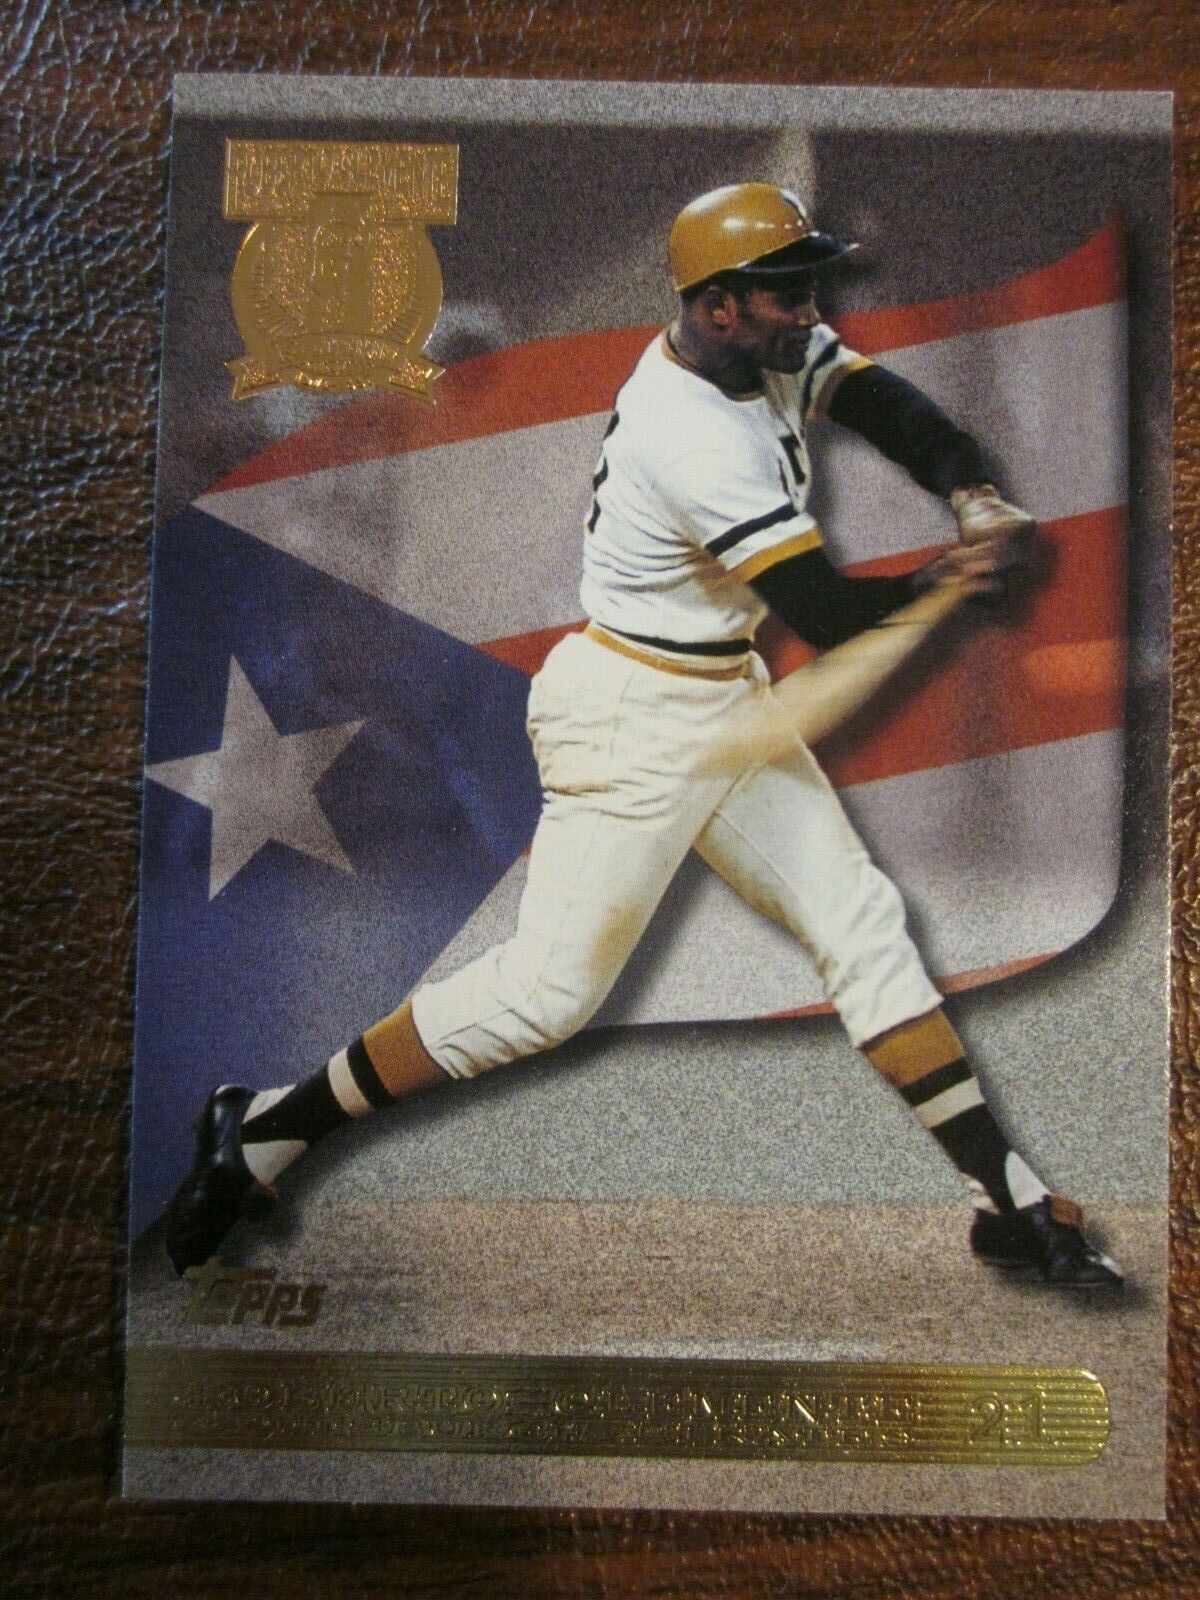 1998 Topps Baseball Special Insert Roberto Clemente Tribute Card RC3